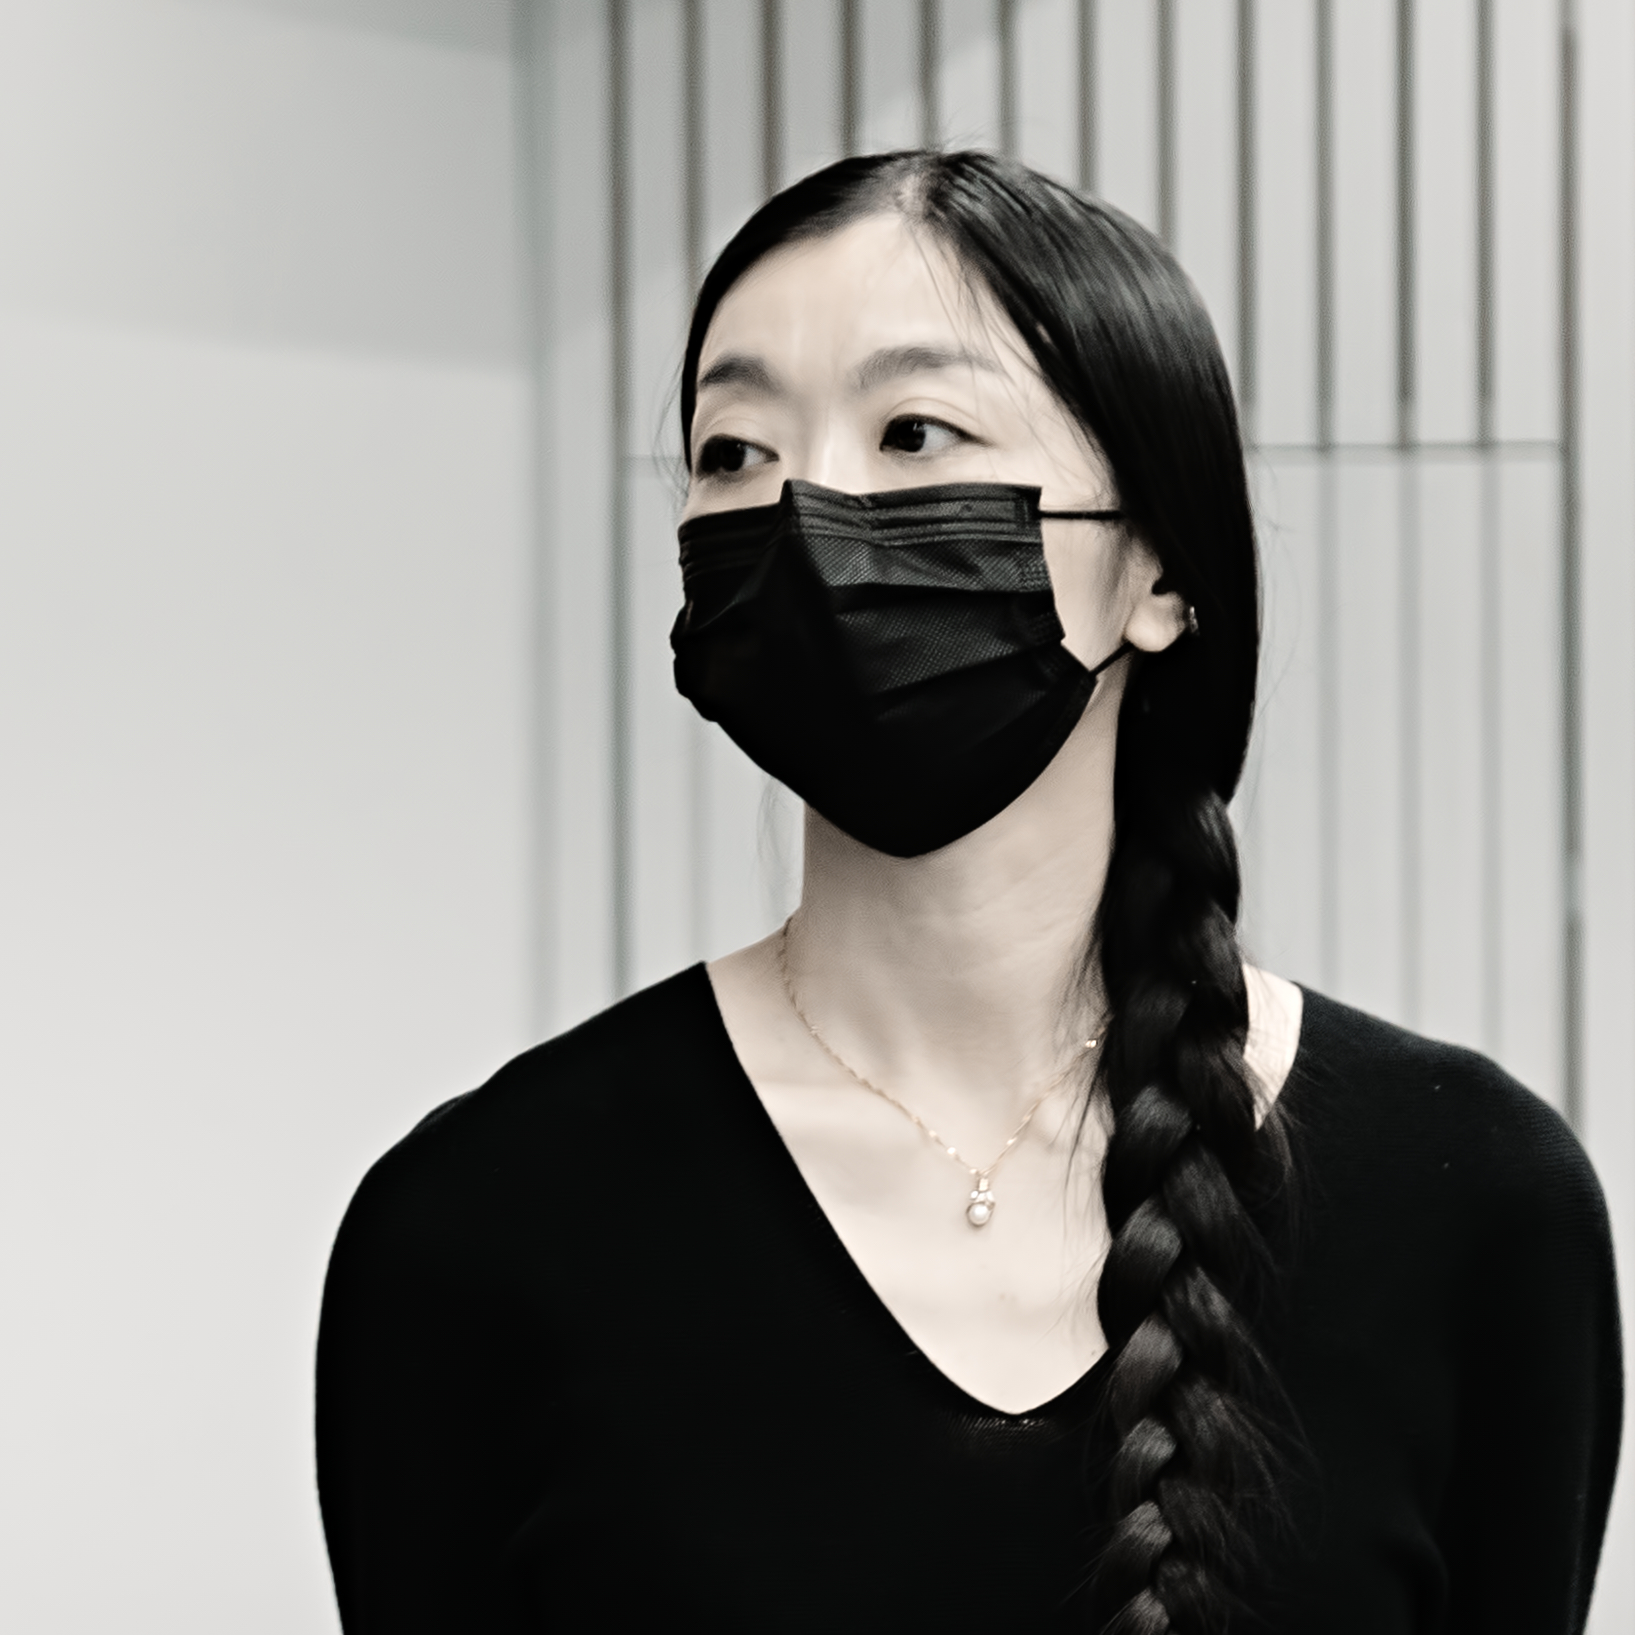 this image is of a woman in black with mask and long black hair in a plait